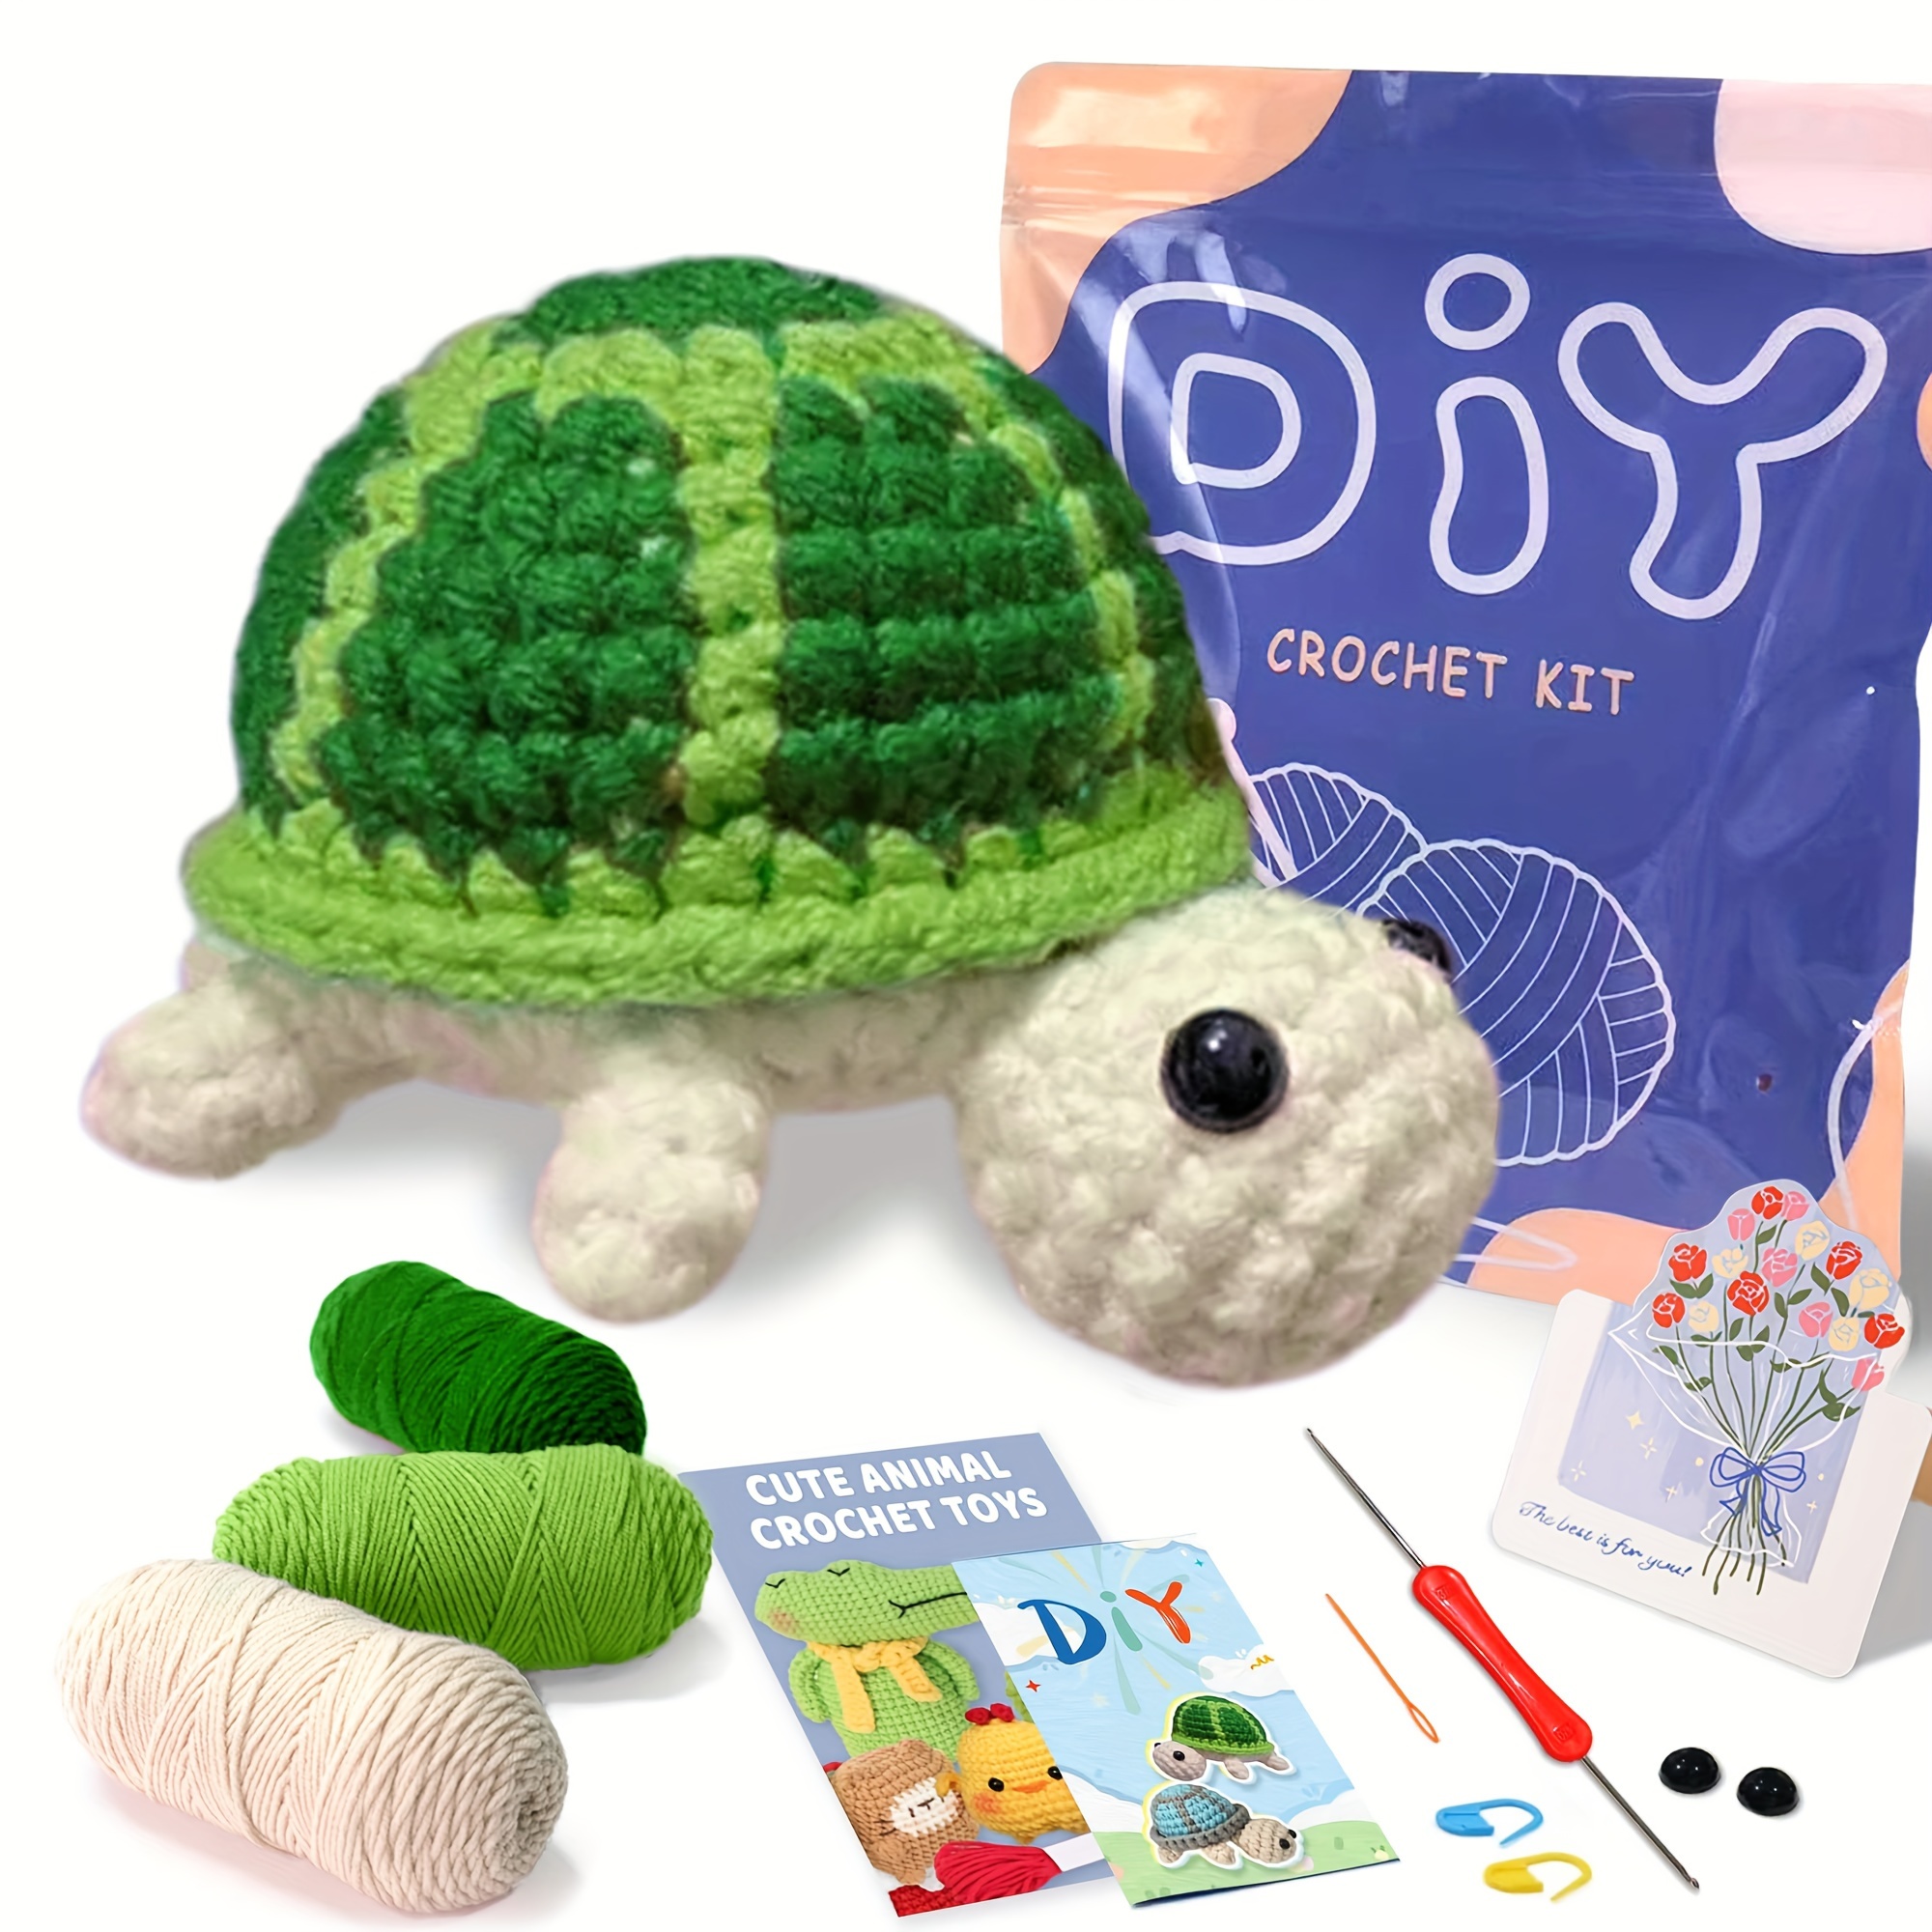 

Beginner Crochet Kit With Turtle & Fox Designs - Complete Starter Set With Hook, Yarn, And Accessories In Green/blue